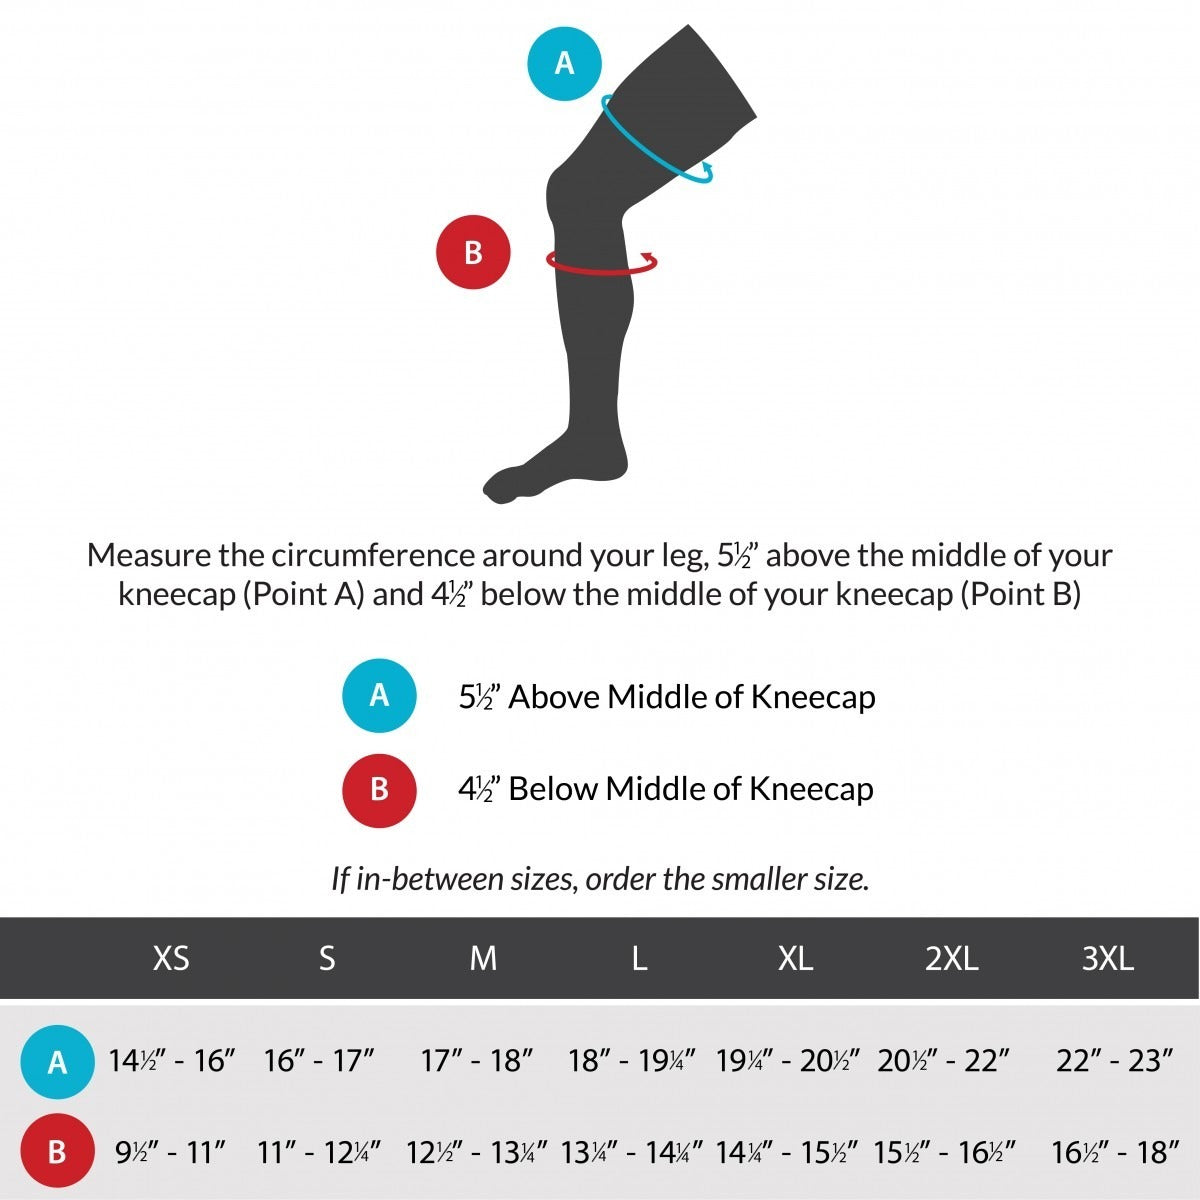 Sizing chart for bursitis knee brace. Available in sizes XS-3XL.